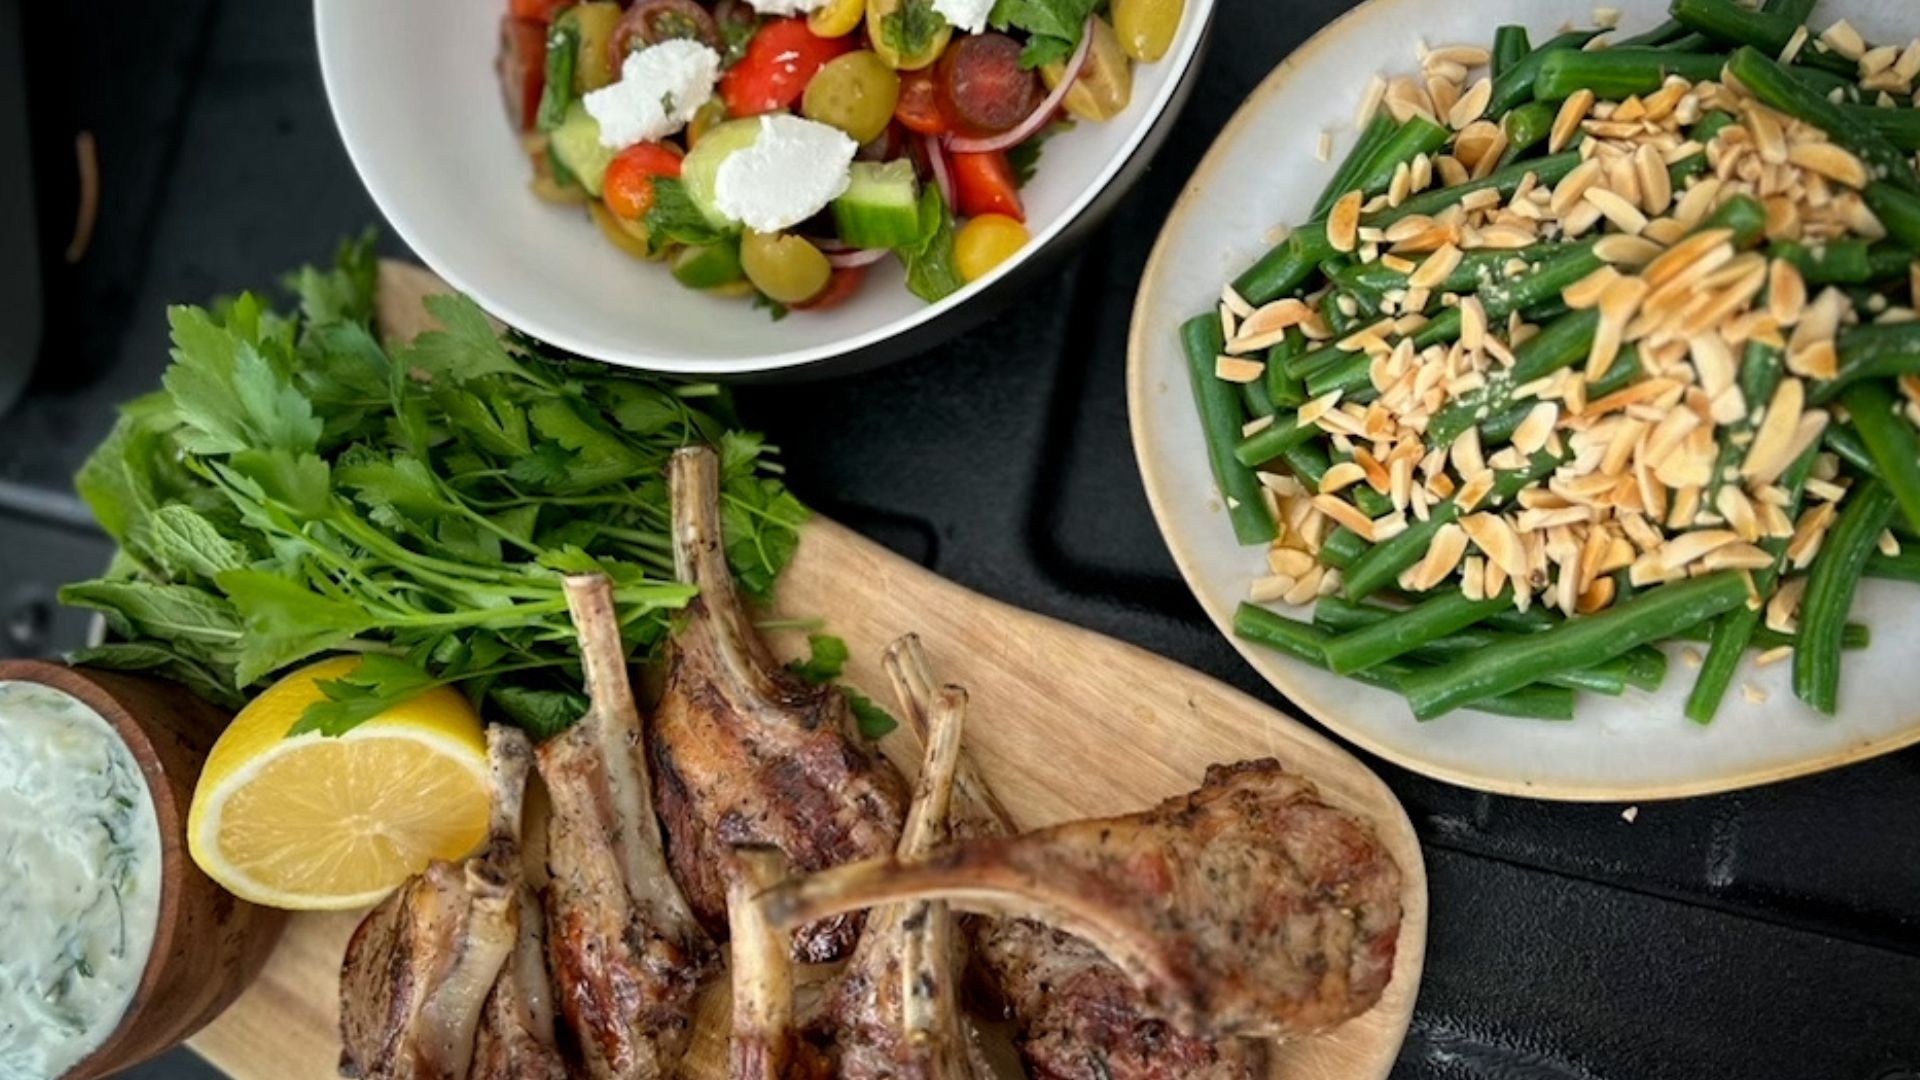 Try This Delicious BBQ Lamb Cutlet Recipe